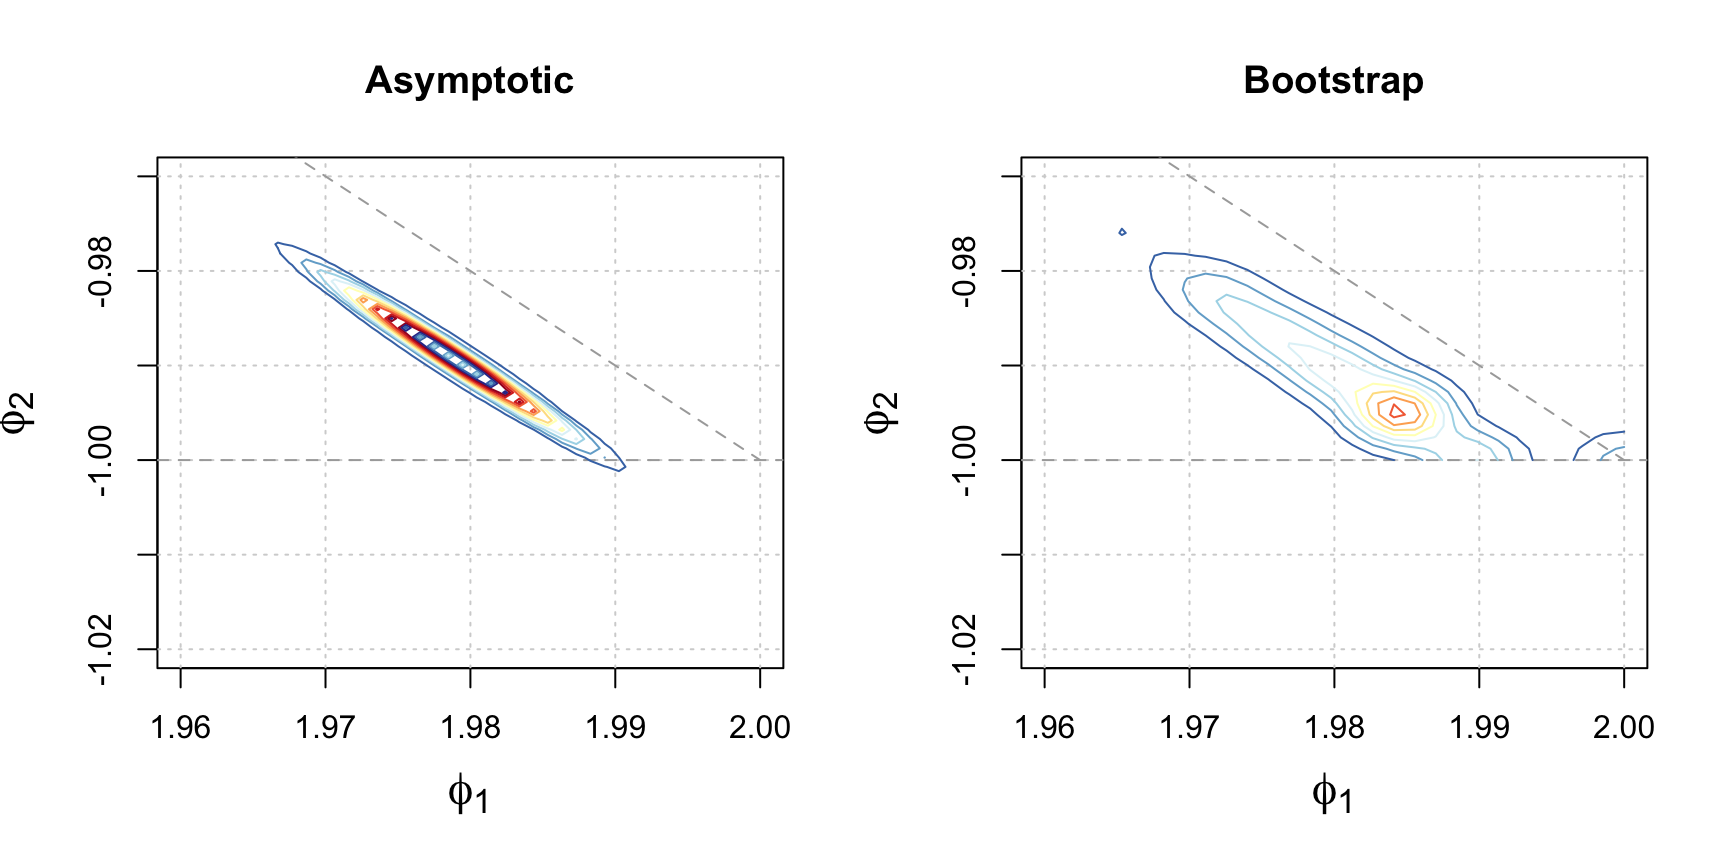 Estimated distributions of $\hat{\phi_1}$ and $\hat{\phi_2}$ based on the MLE using asymptotic and parametric bootstrap techniques. The colored contours represent the density of the distributions and the dark grey lines represent the boundary constraints of $\left|\phi_2\right|<1$ and $\phi_2 = 1 - \phi_1$.